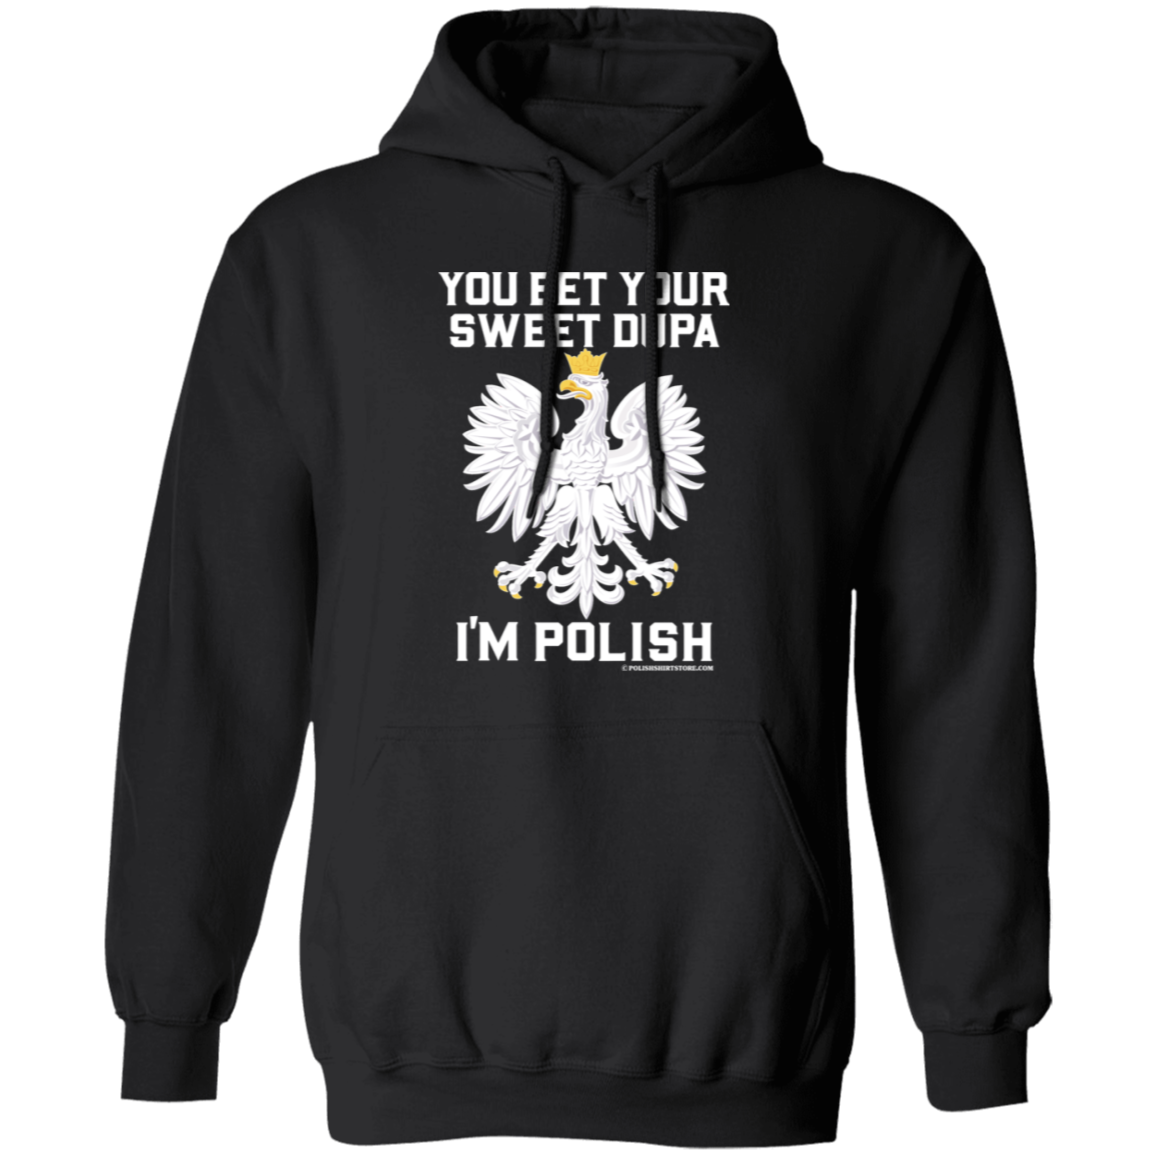 You Bet Your Sweet Dupa I'm Polish - New Apparel CustomCat G185 Pullover Hoodie Black S